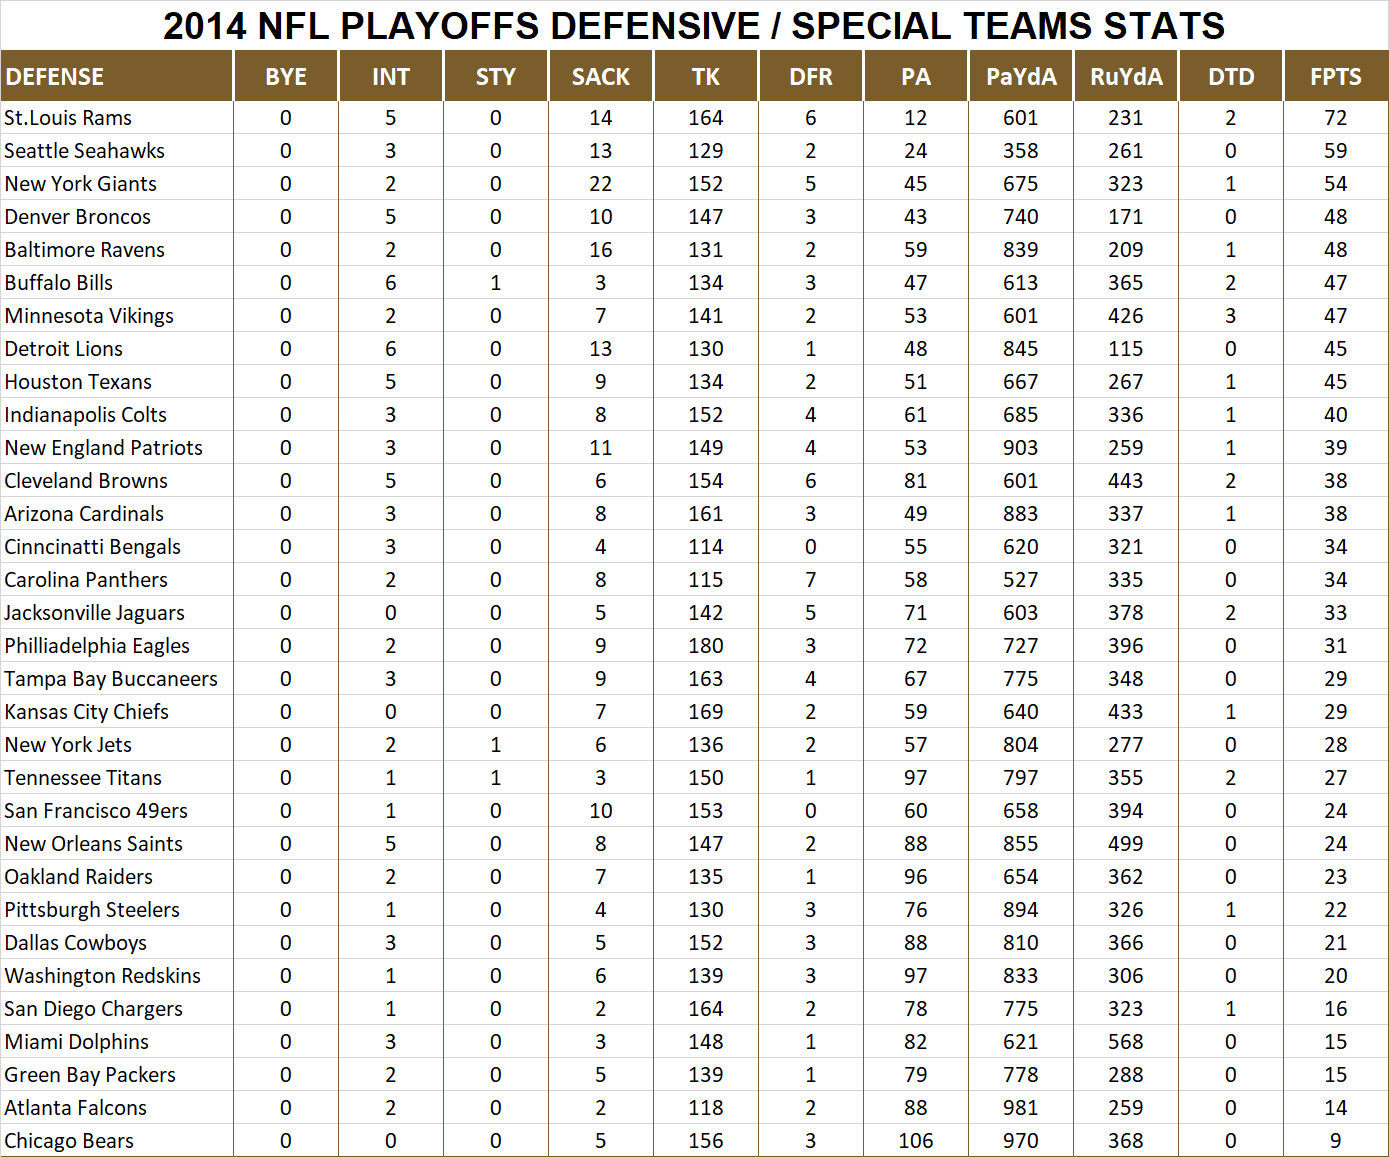 2014 National Football League Pool Playoff Player Defensive Stats